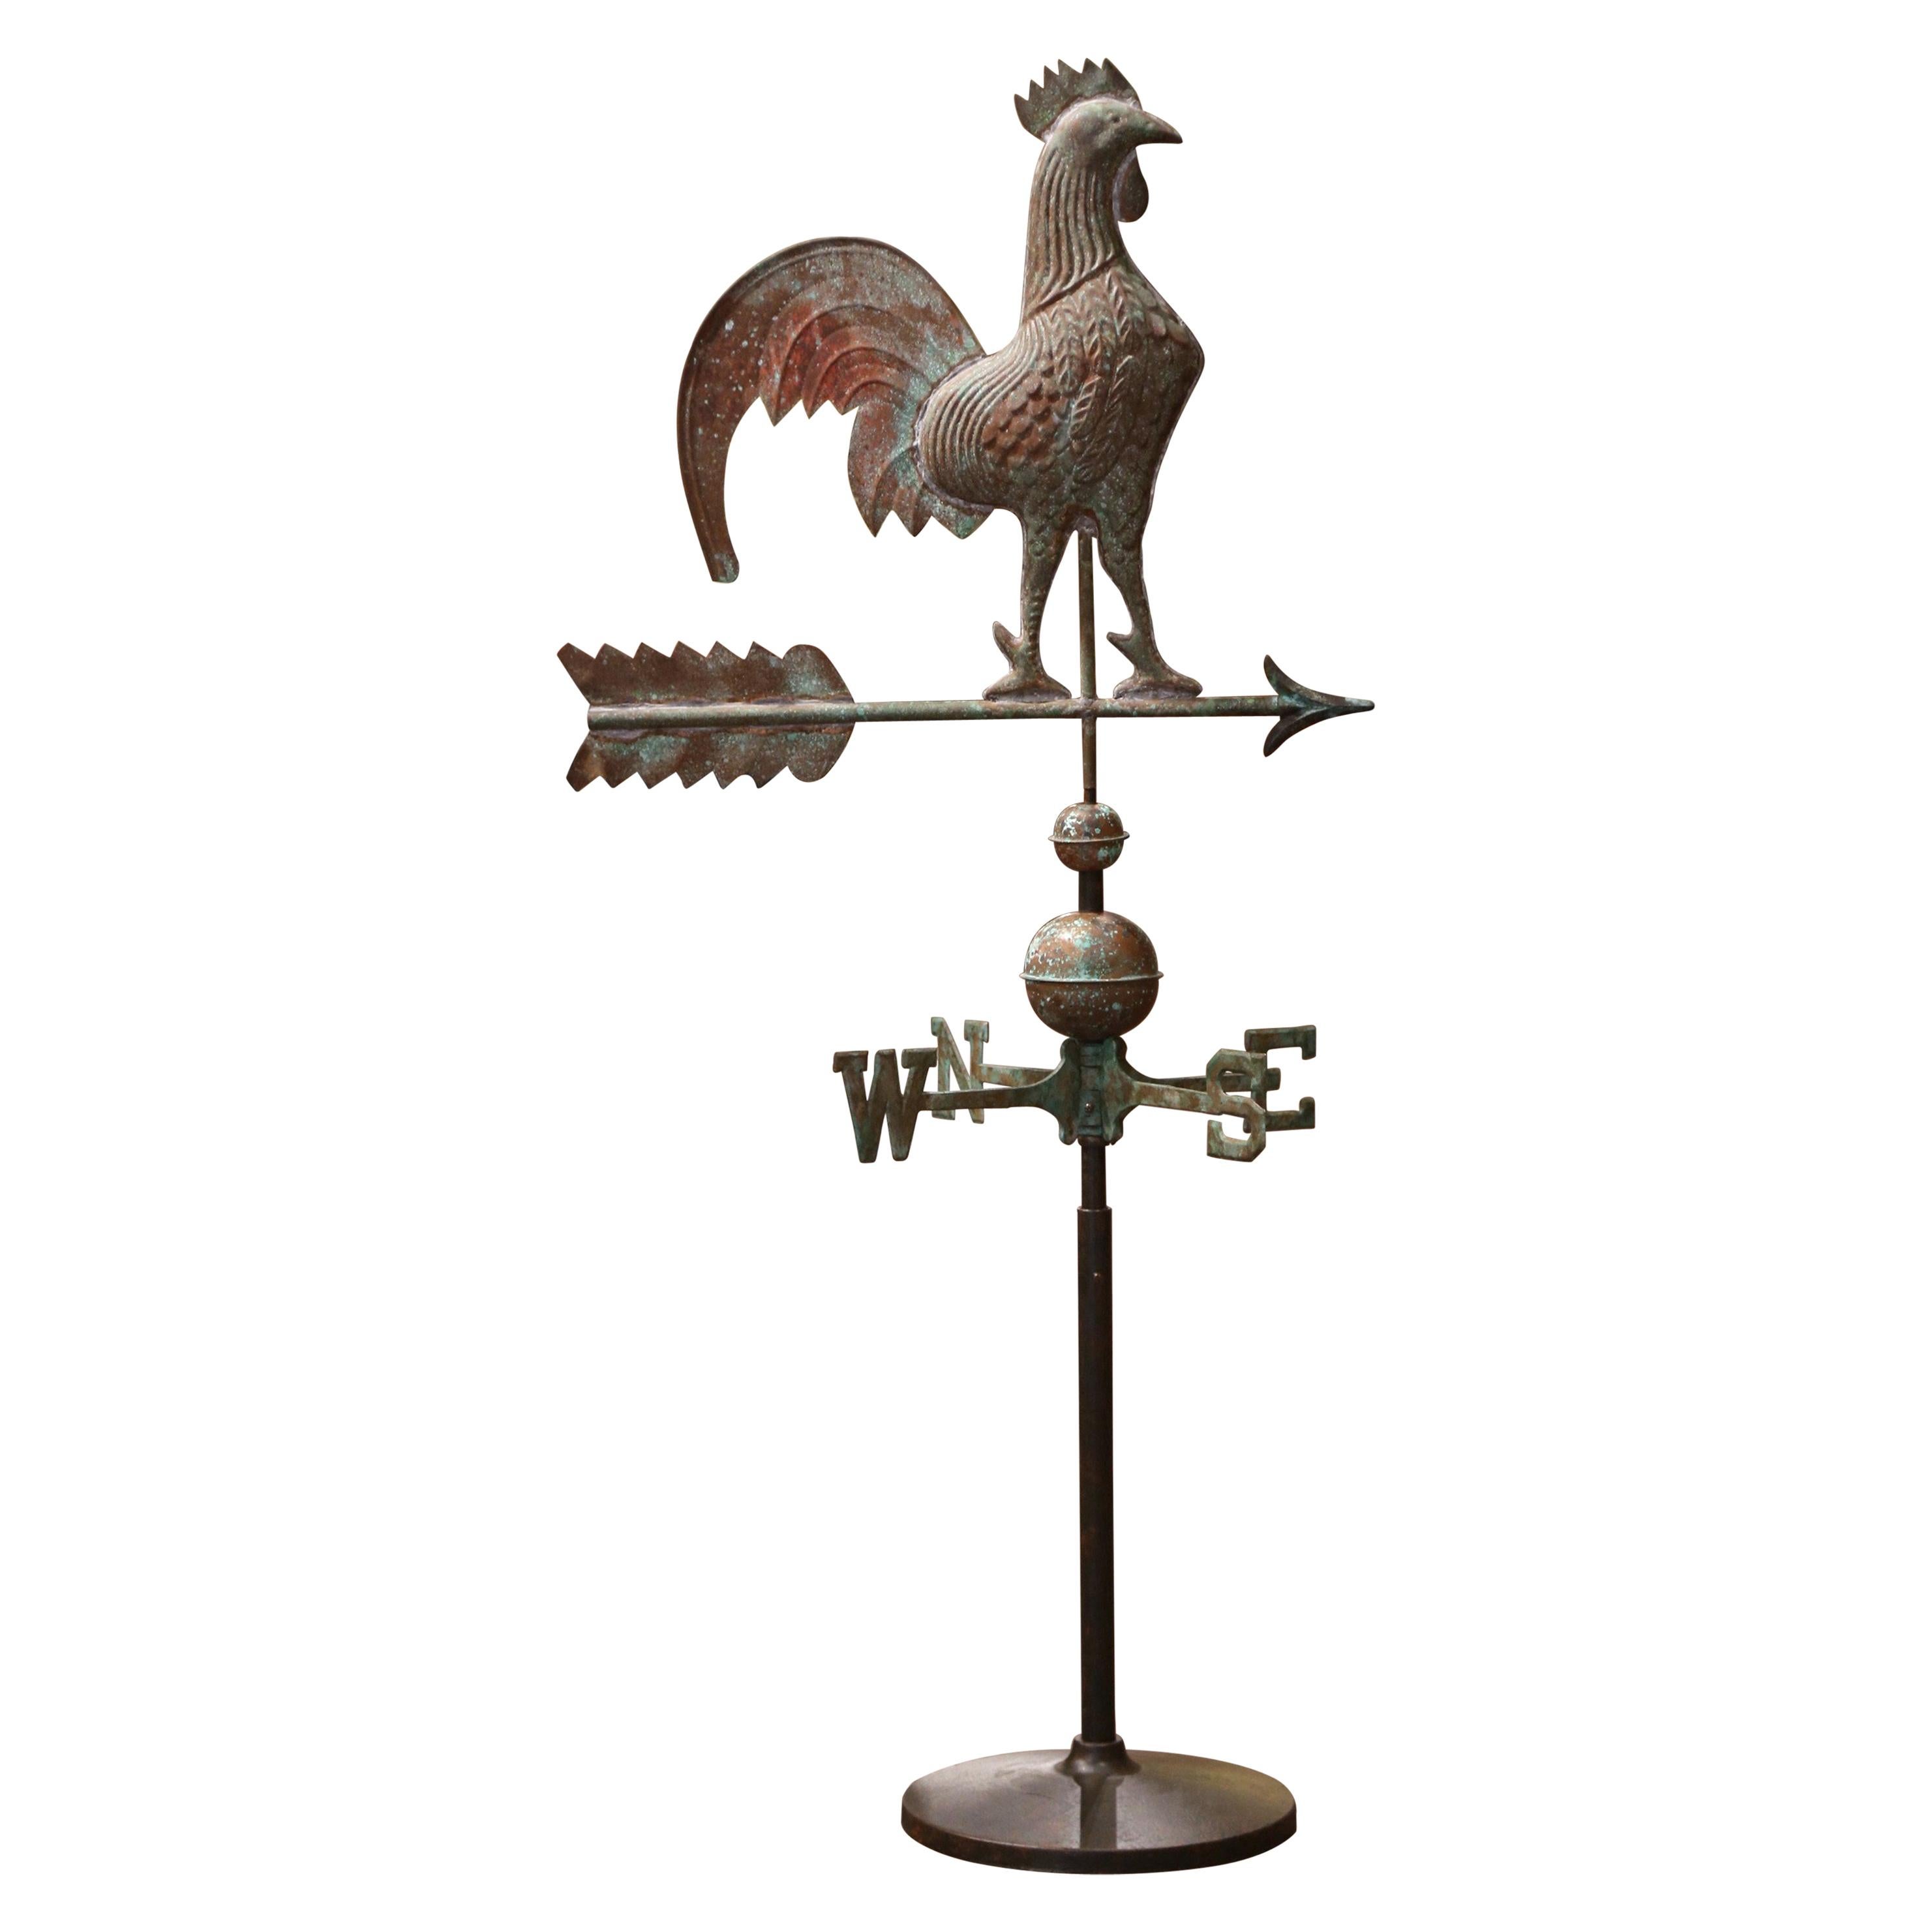 19th Century French Patinated Tole Rooster Weather Vane with the Cardinal Points